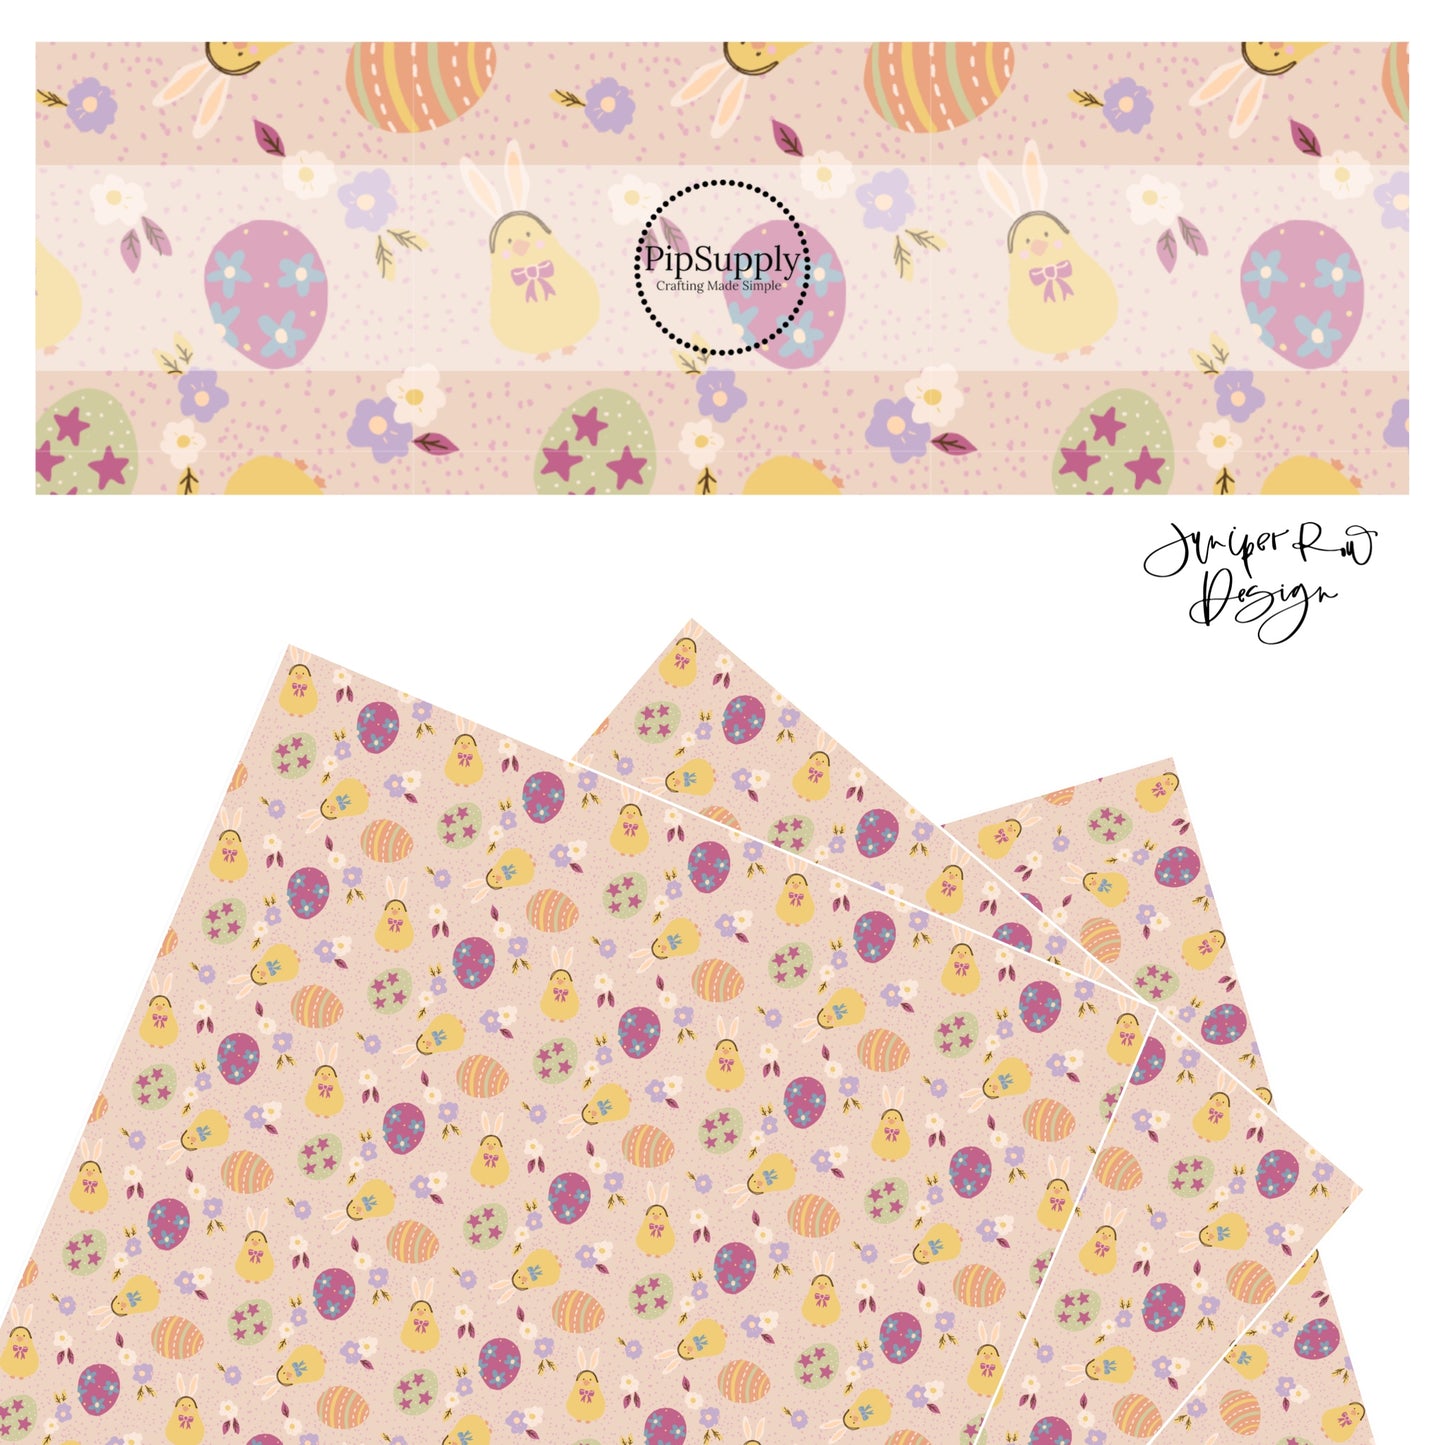 Flowers on purple, purple stars on green, stripes on orange easter eggs. Yellow chick with purple bow and bunny ears eith purple and cream flowers on pink polka dot faux leather sheet